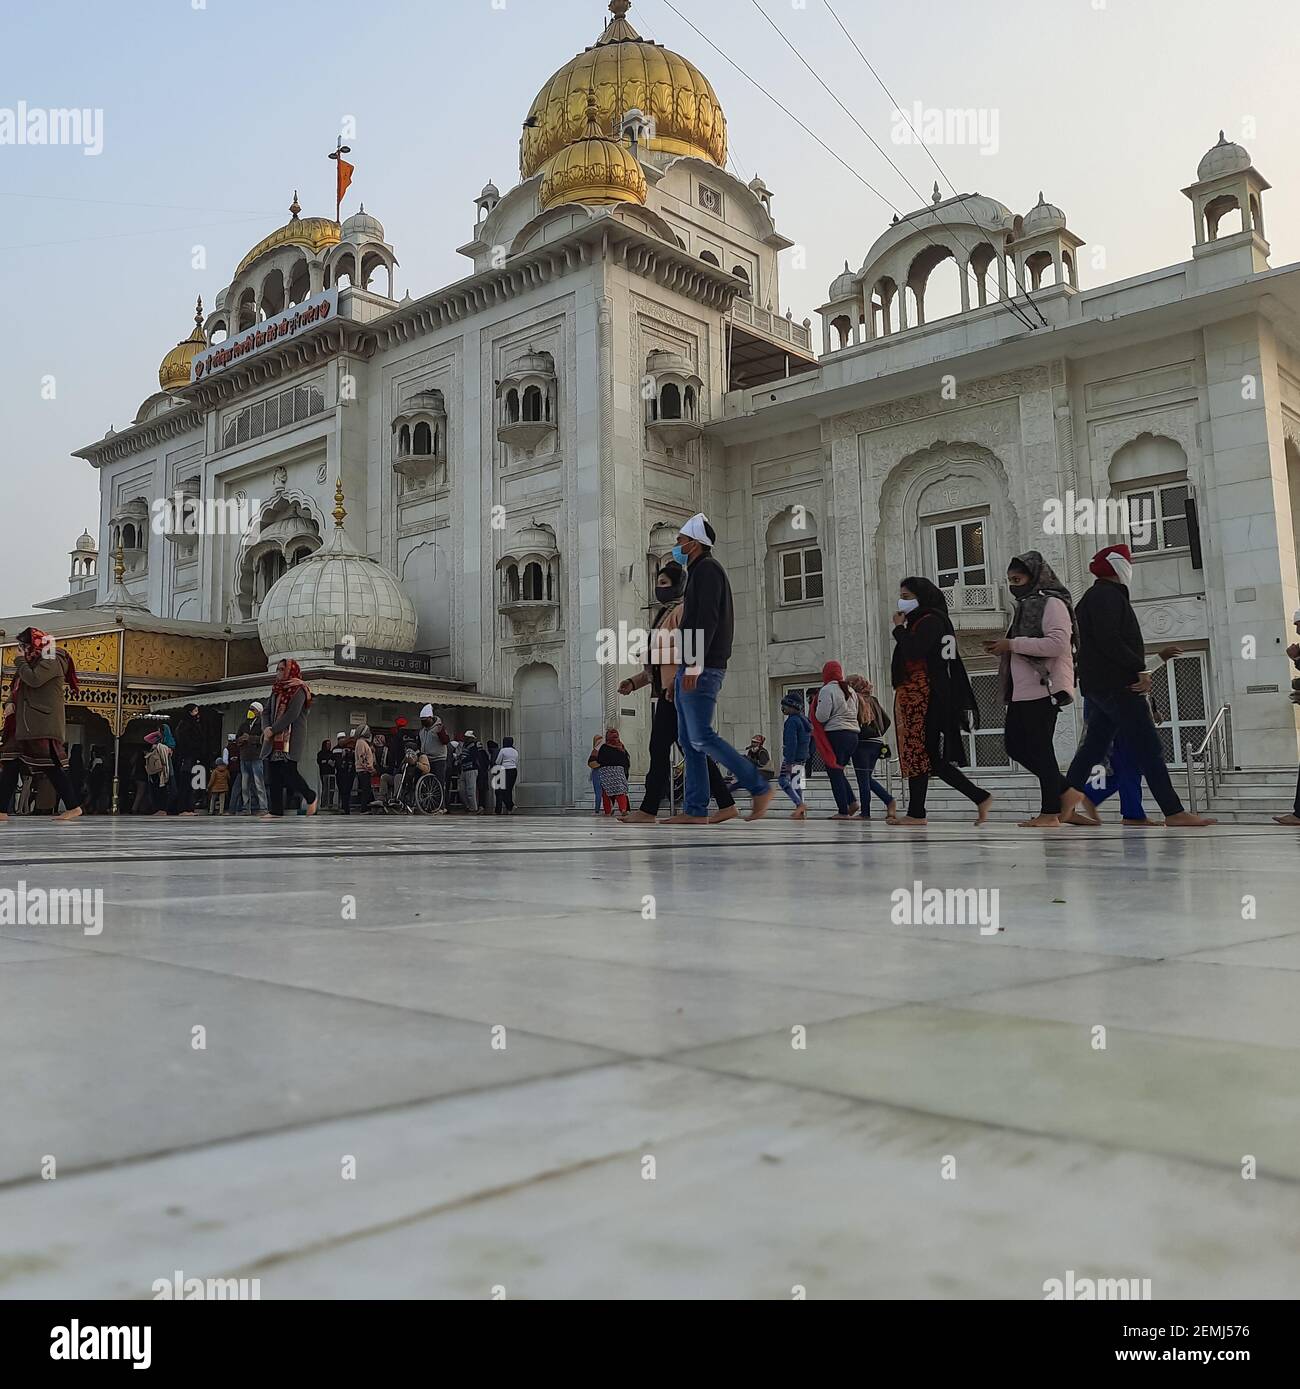 Gurdwara Bangla Sahib is the most prominent Sikh Gurudwara, Bangla Sahib Gurudwara in New Delhi, India inside view during evening time Stock Photo